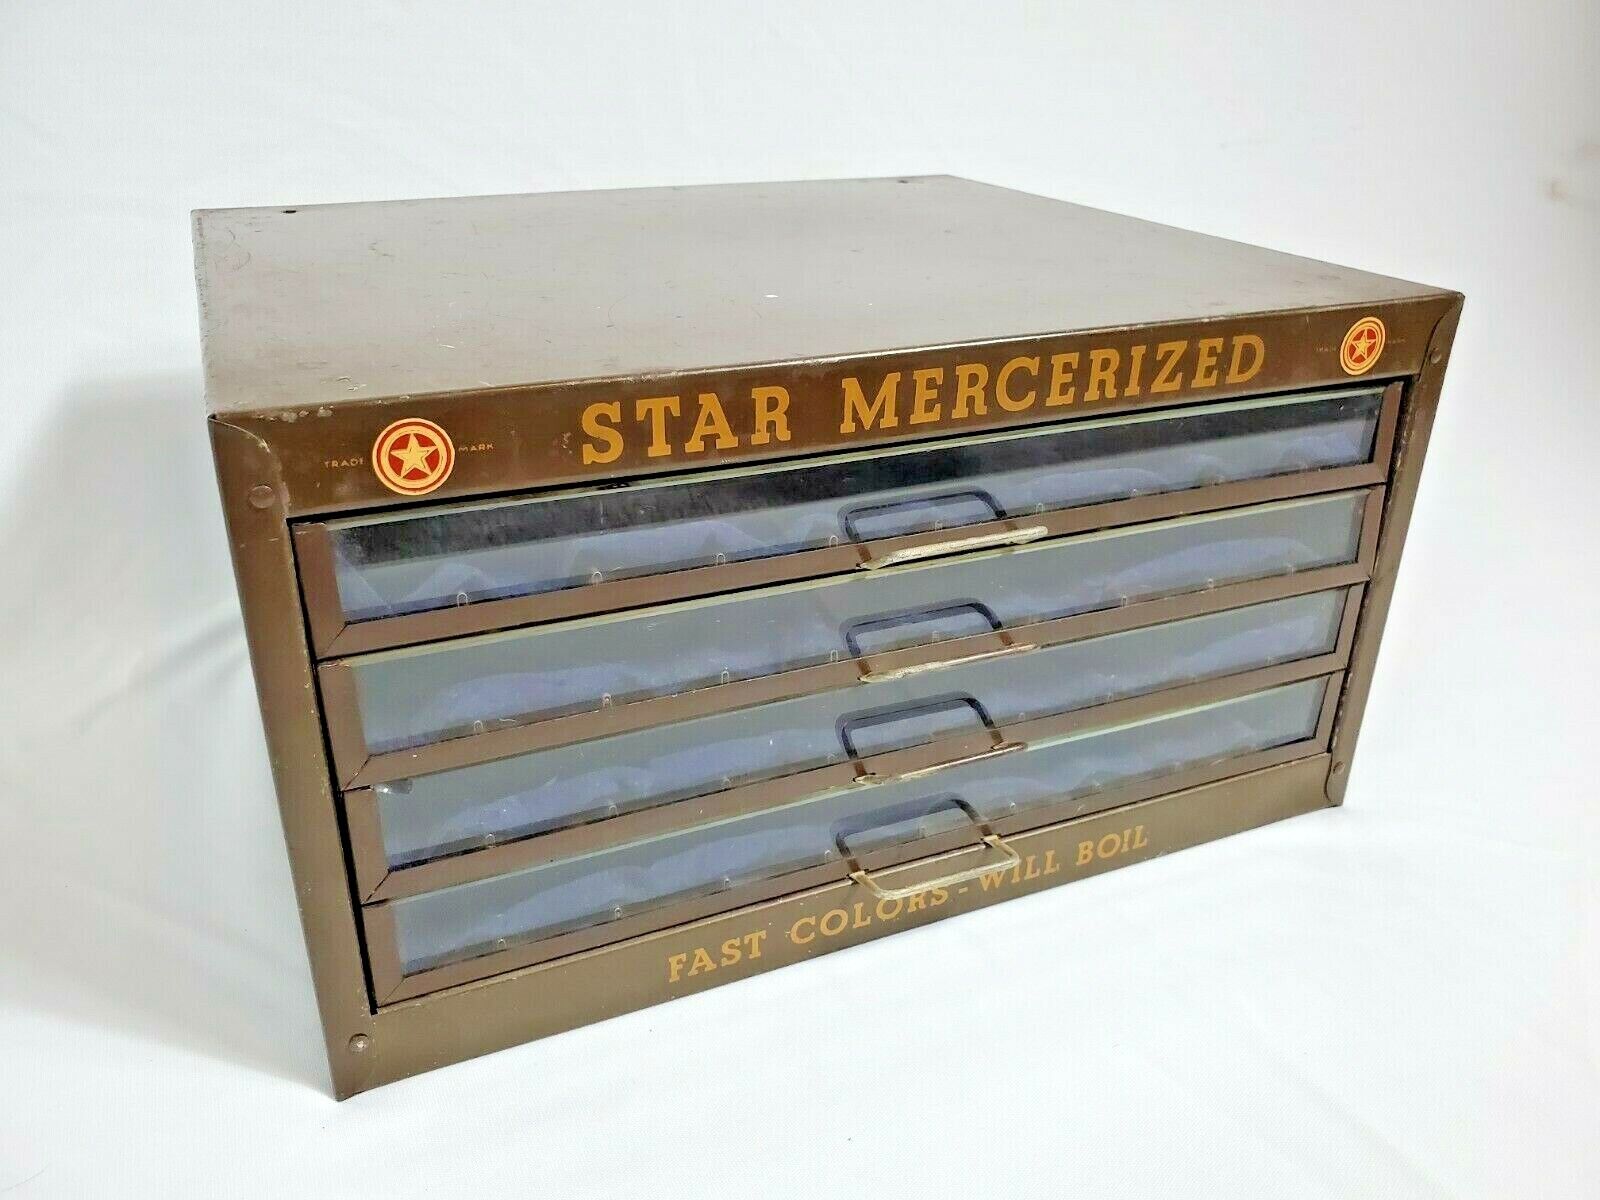  Antique Star Mercerized Sewing Cotton Thread Spool Cabinet 4 Drawer Store Case